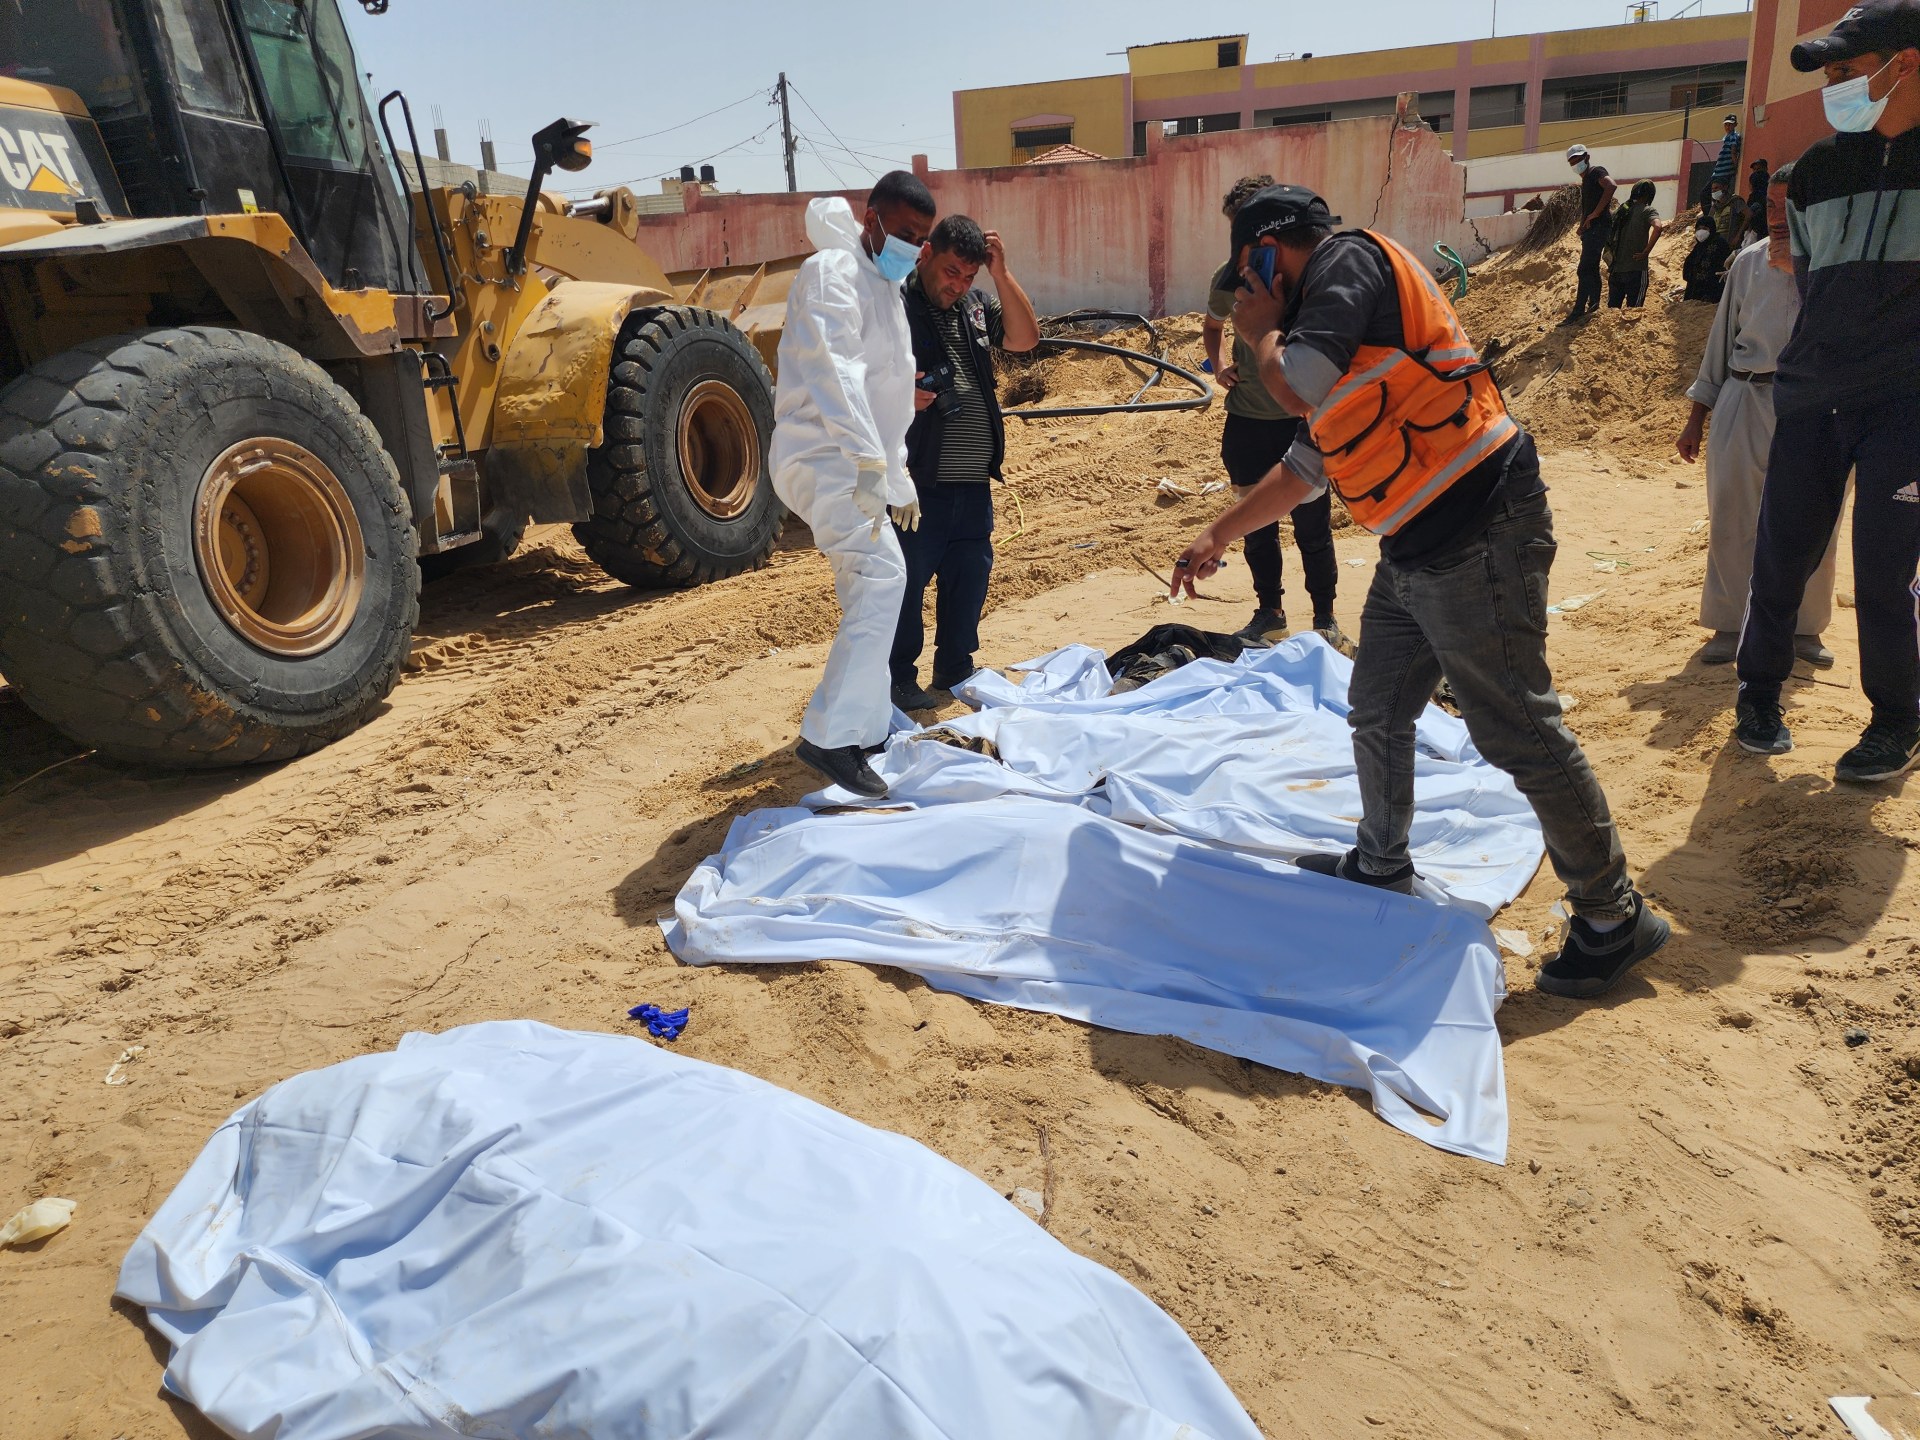 Evidence of torture as nearly 400 bodies found in Gaza mass graves | Israel War on Gaza News